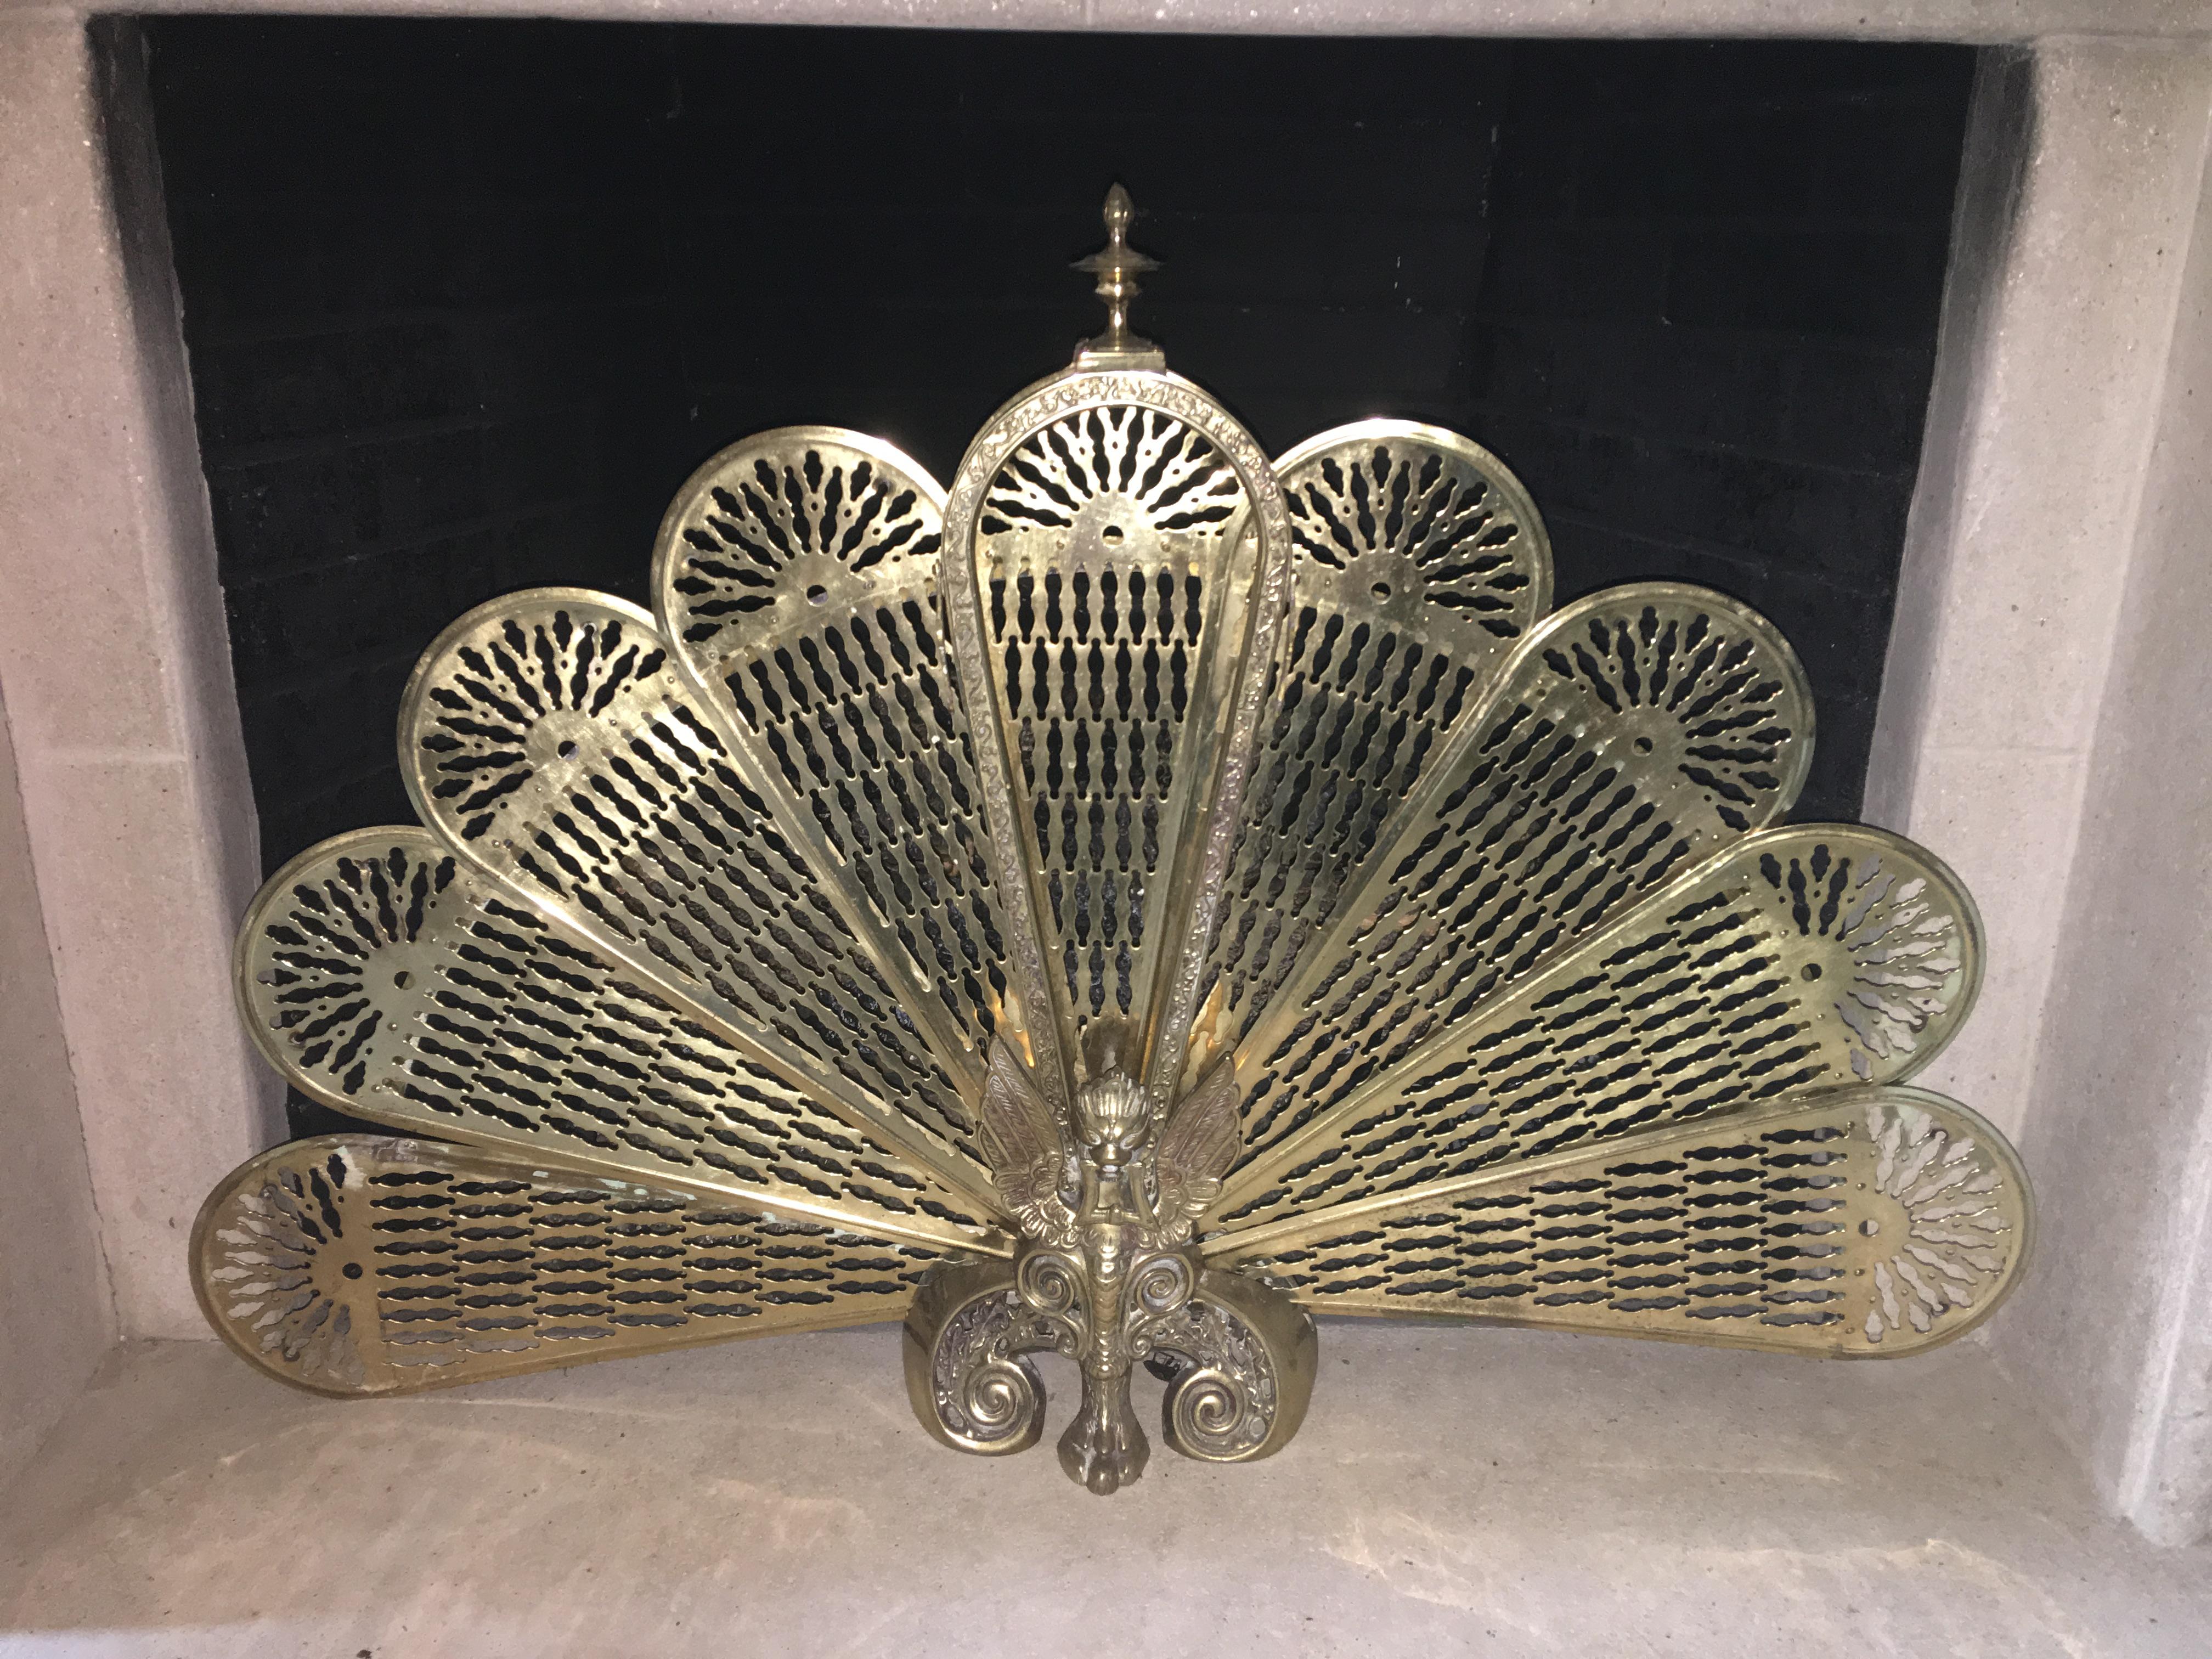 Brass fan screen with a decorative finial, 19th century. Measures: Base is 9